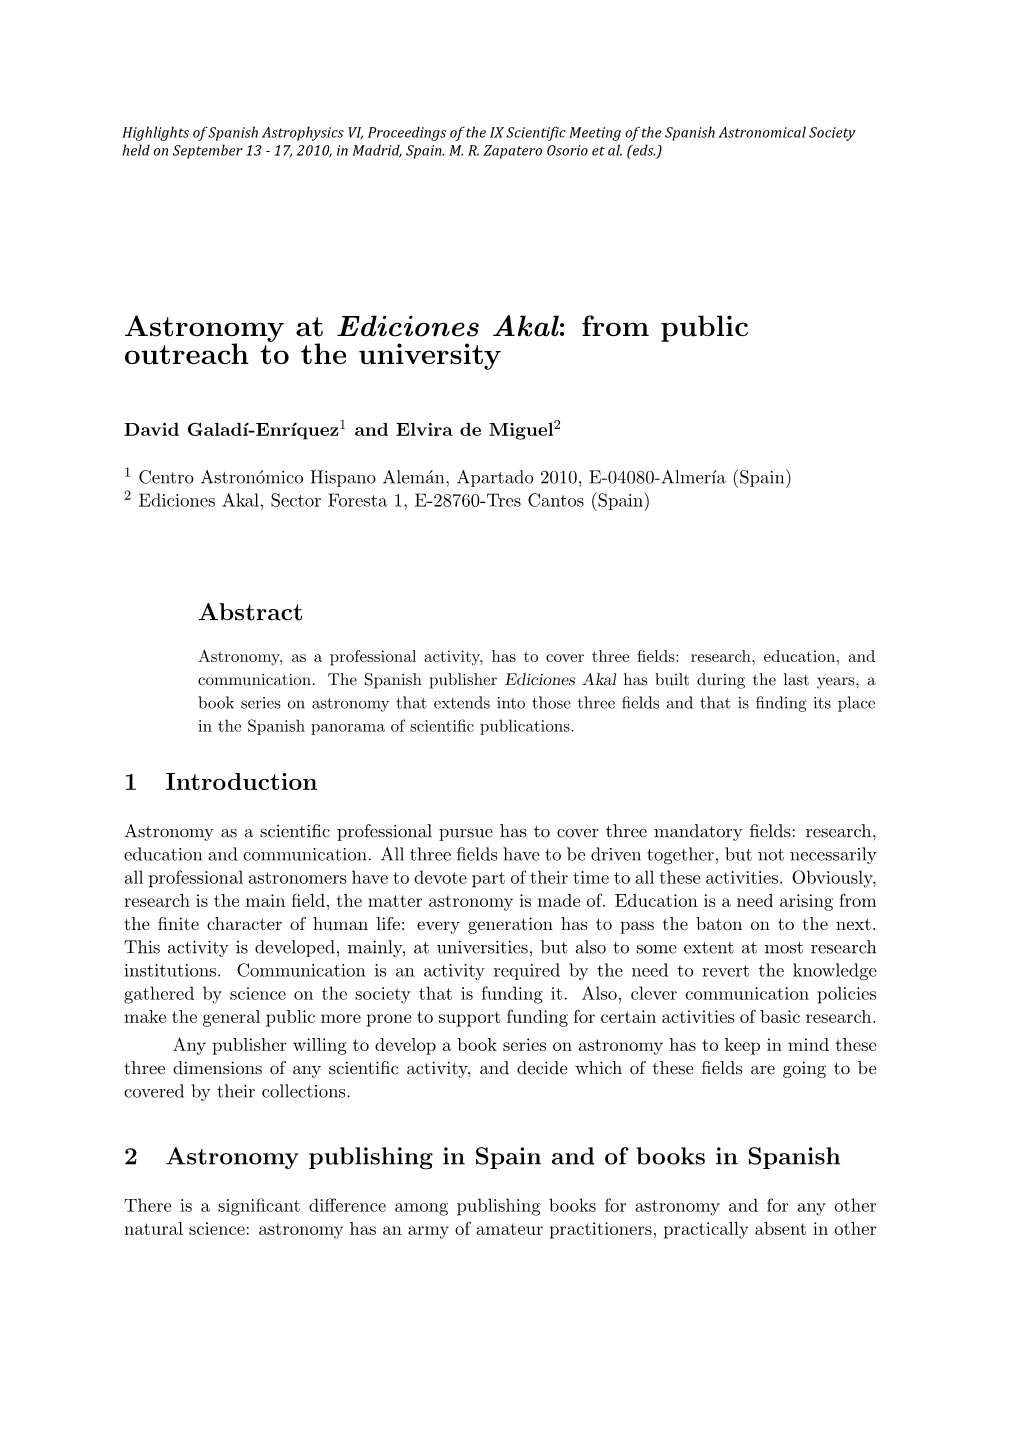 Astronomy at Ediciones Akal: from Public Outreach to the University